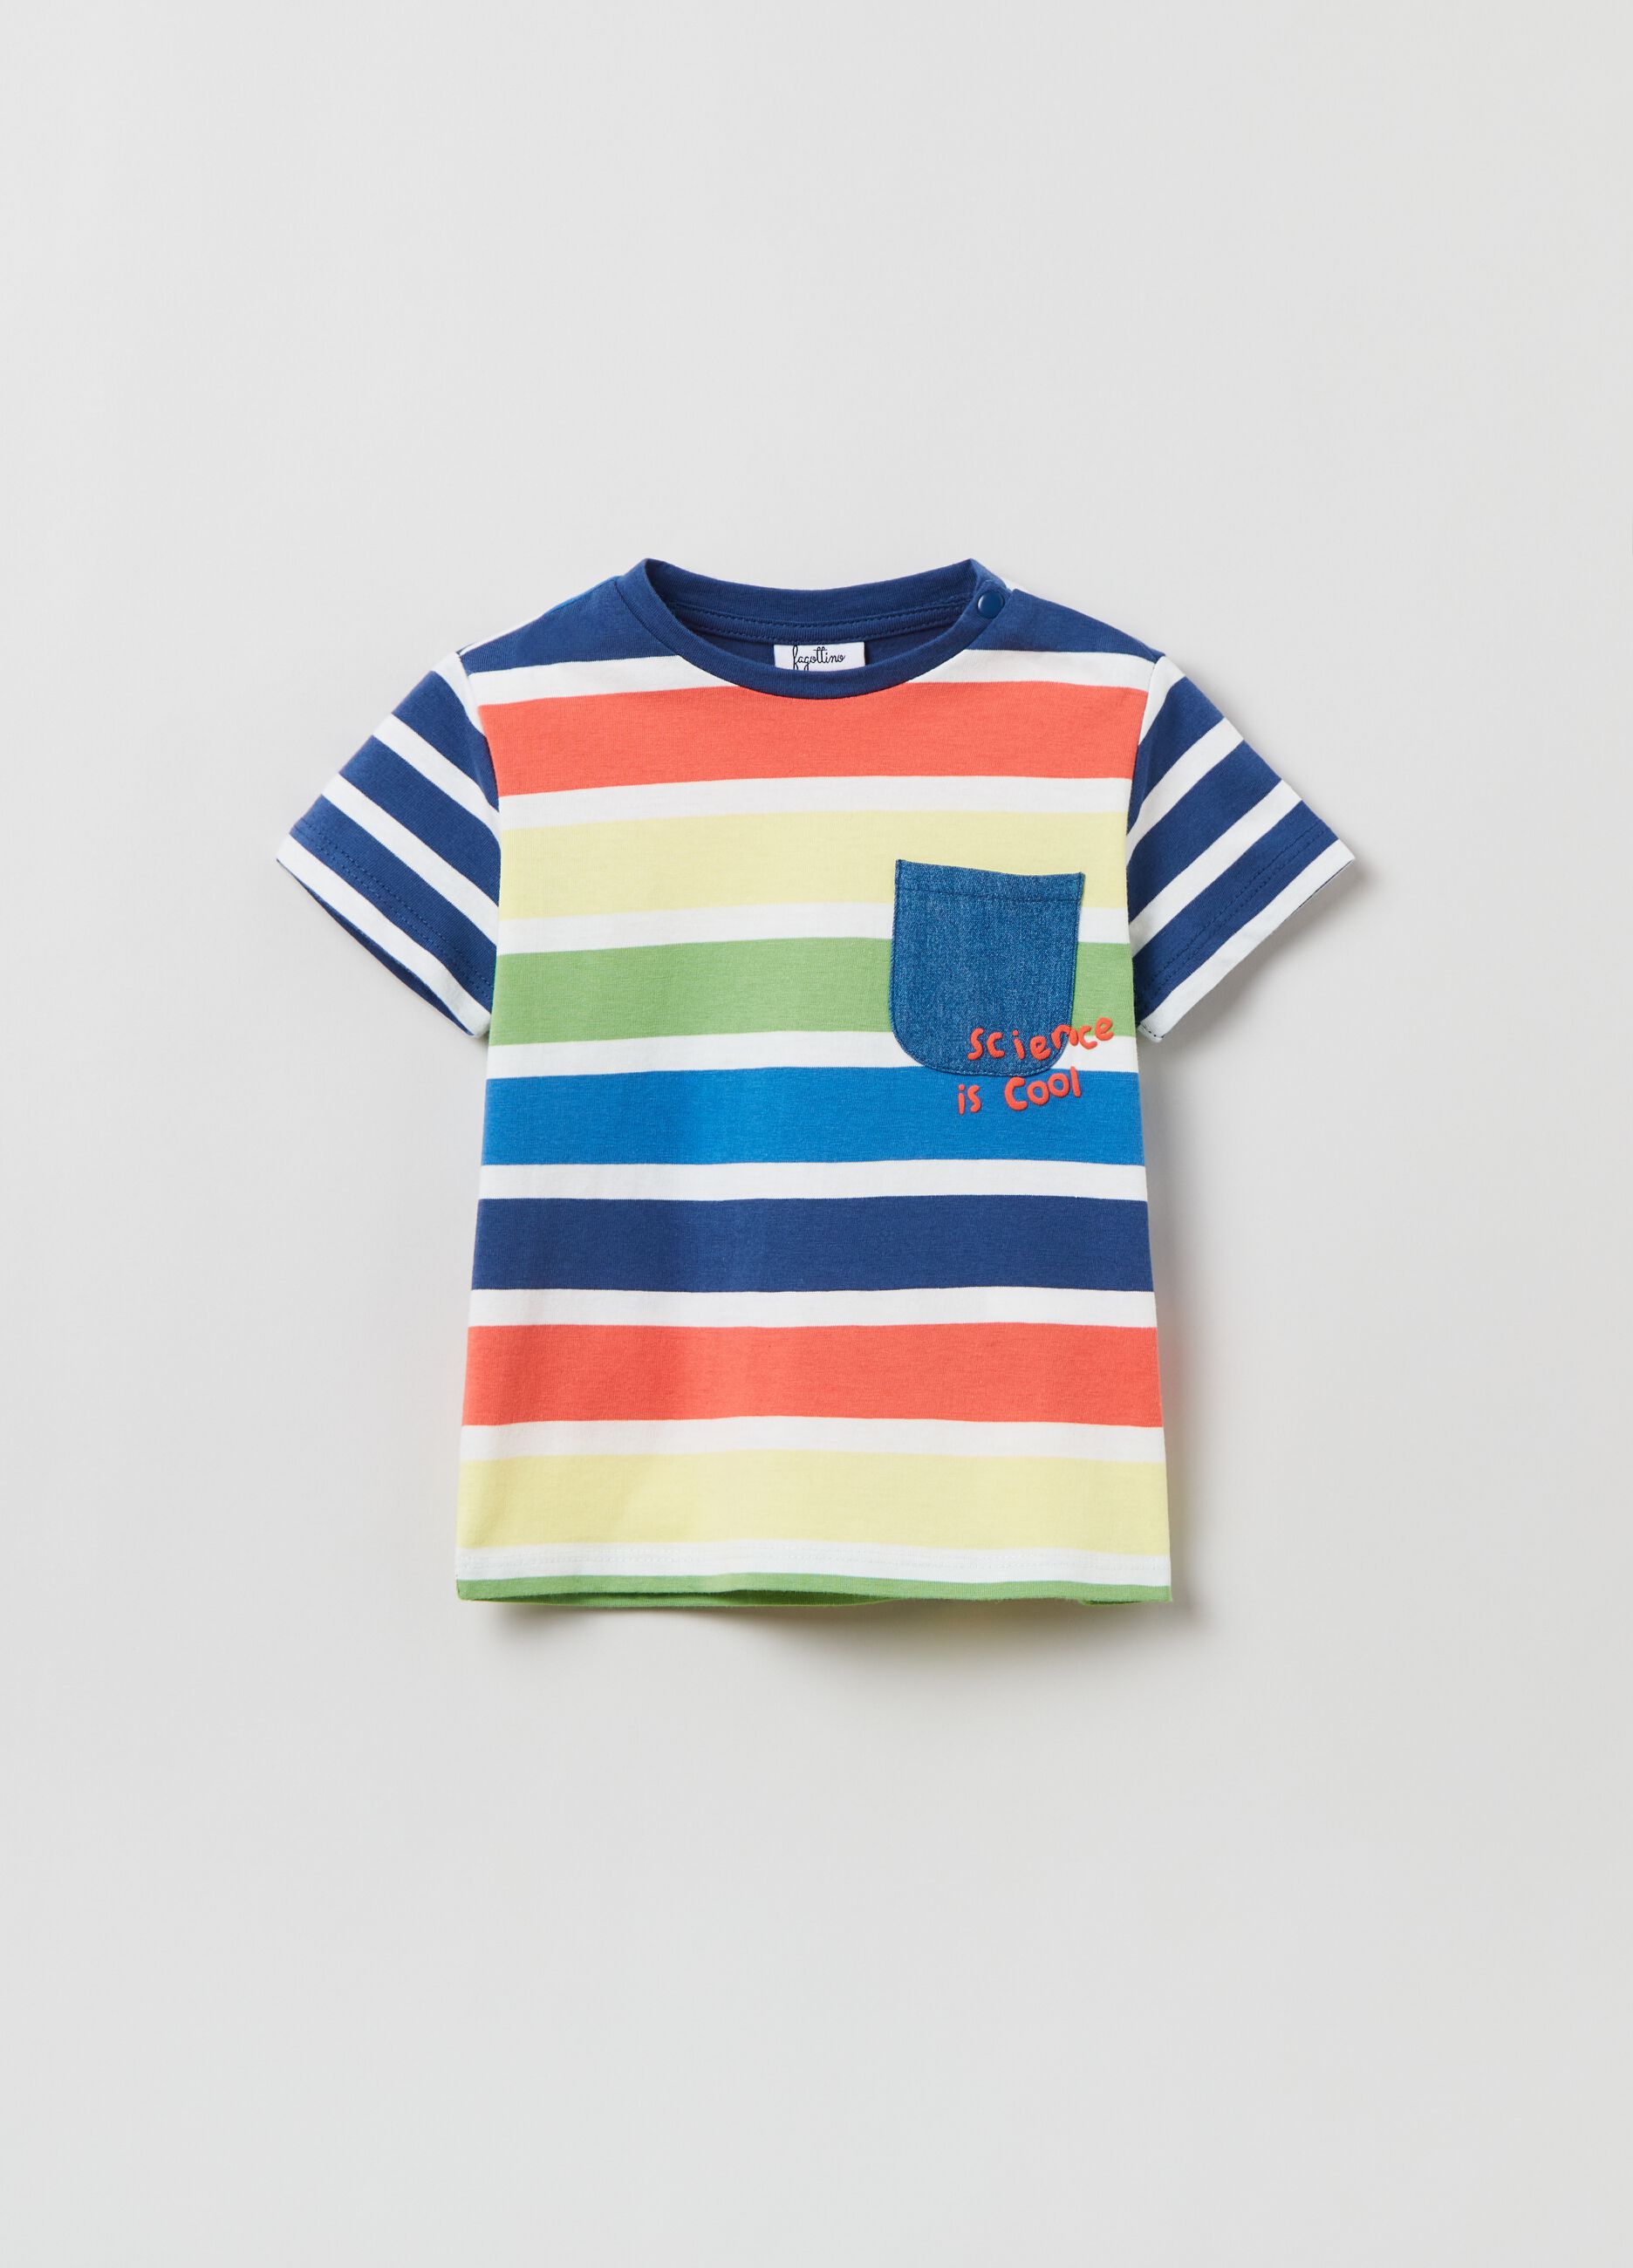 Striped T-shirt with pocket in denim